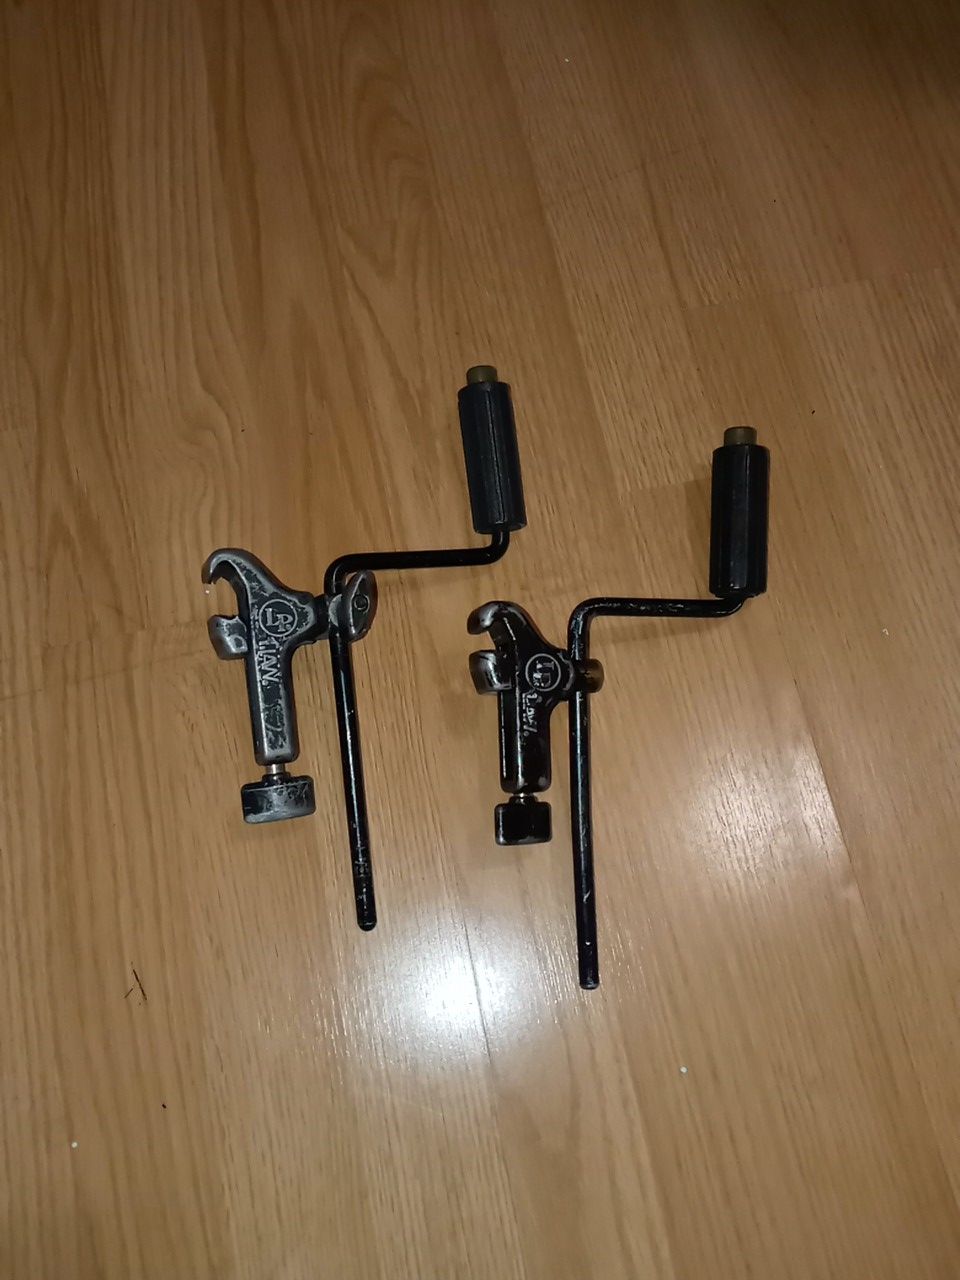 2 LP microphone clamps for toms or congas